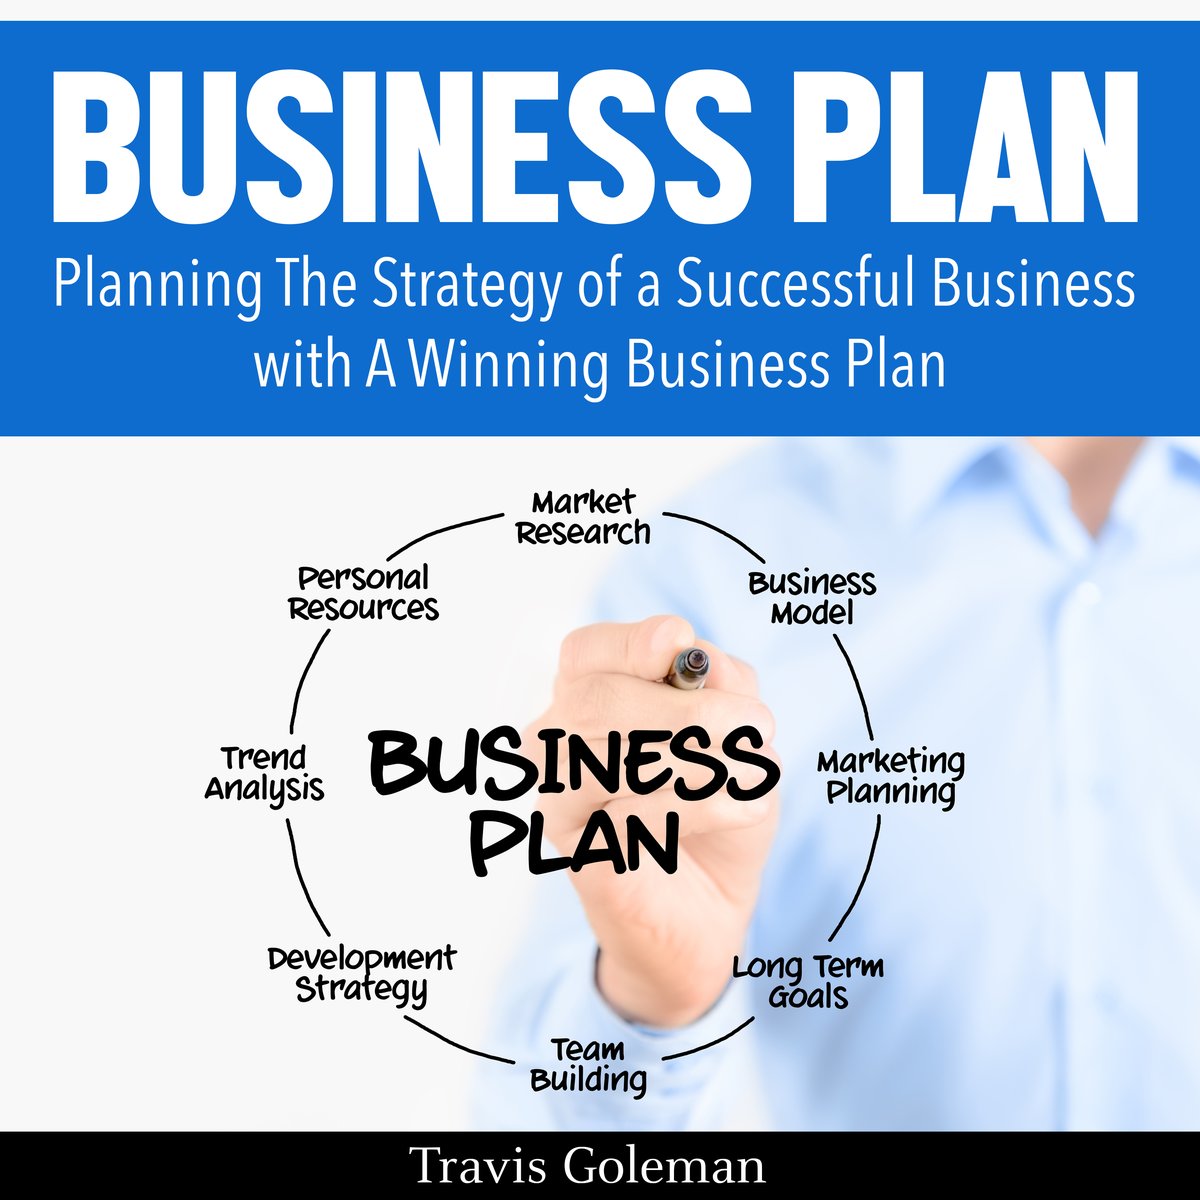 explain the features of a winning business plan